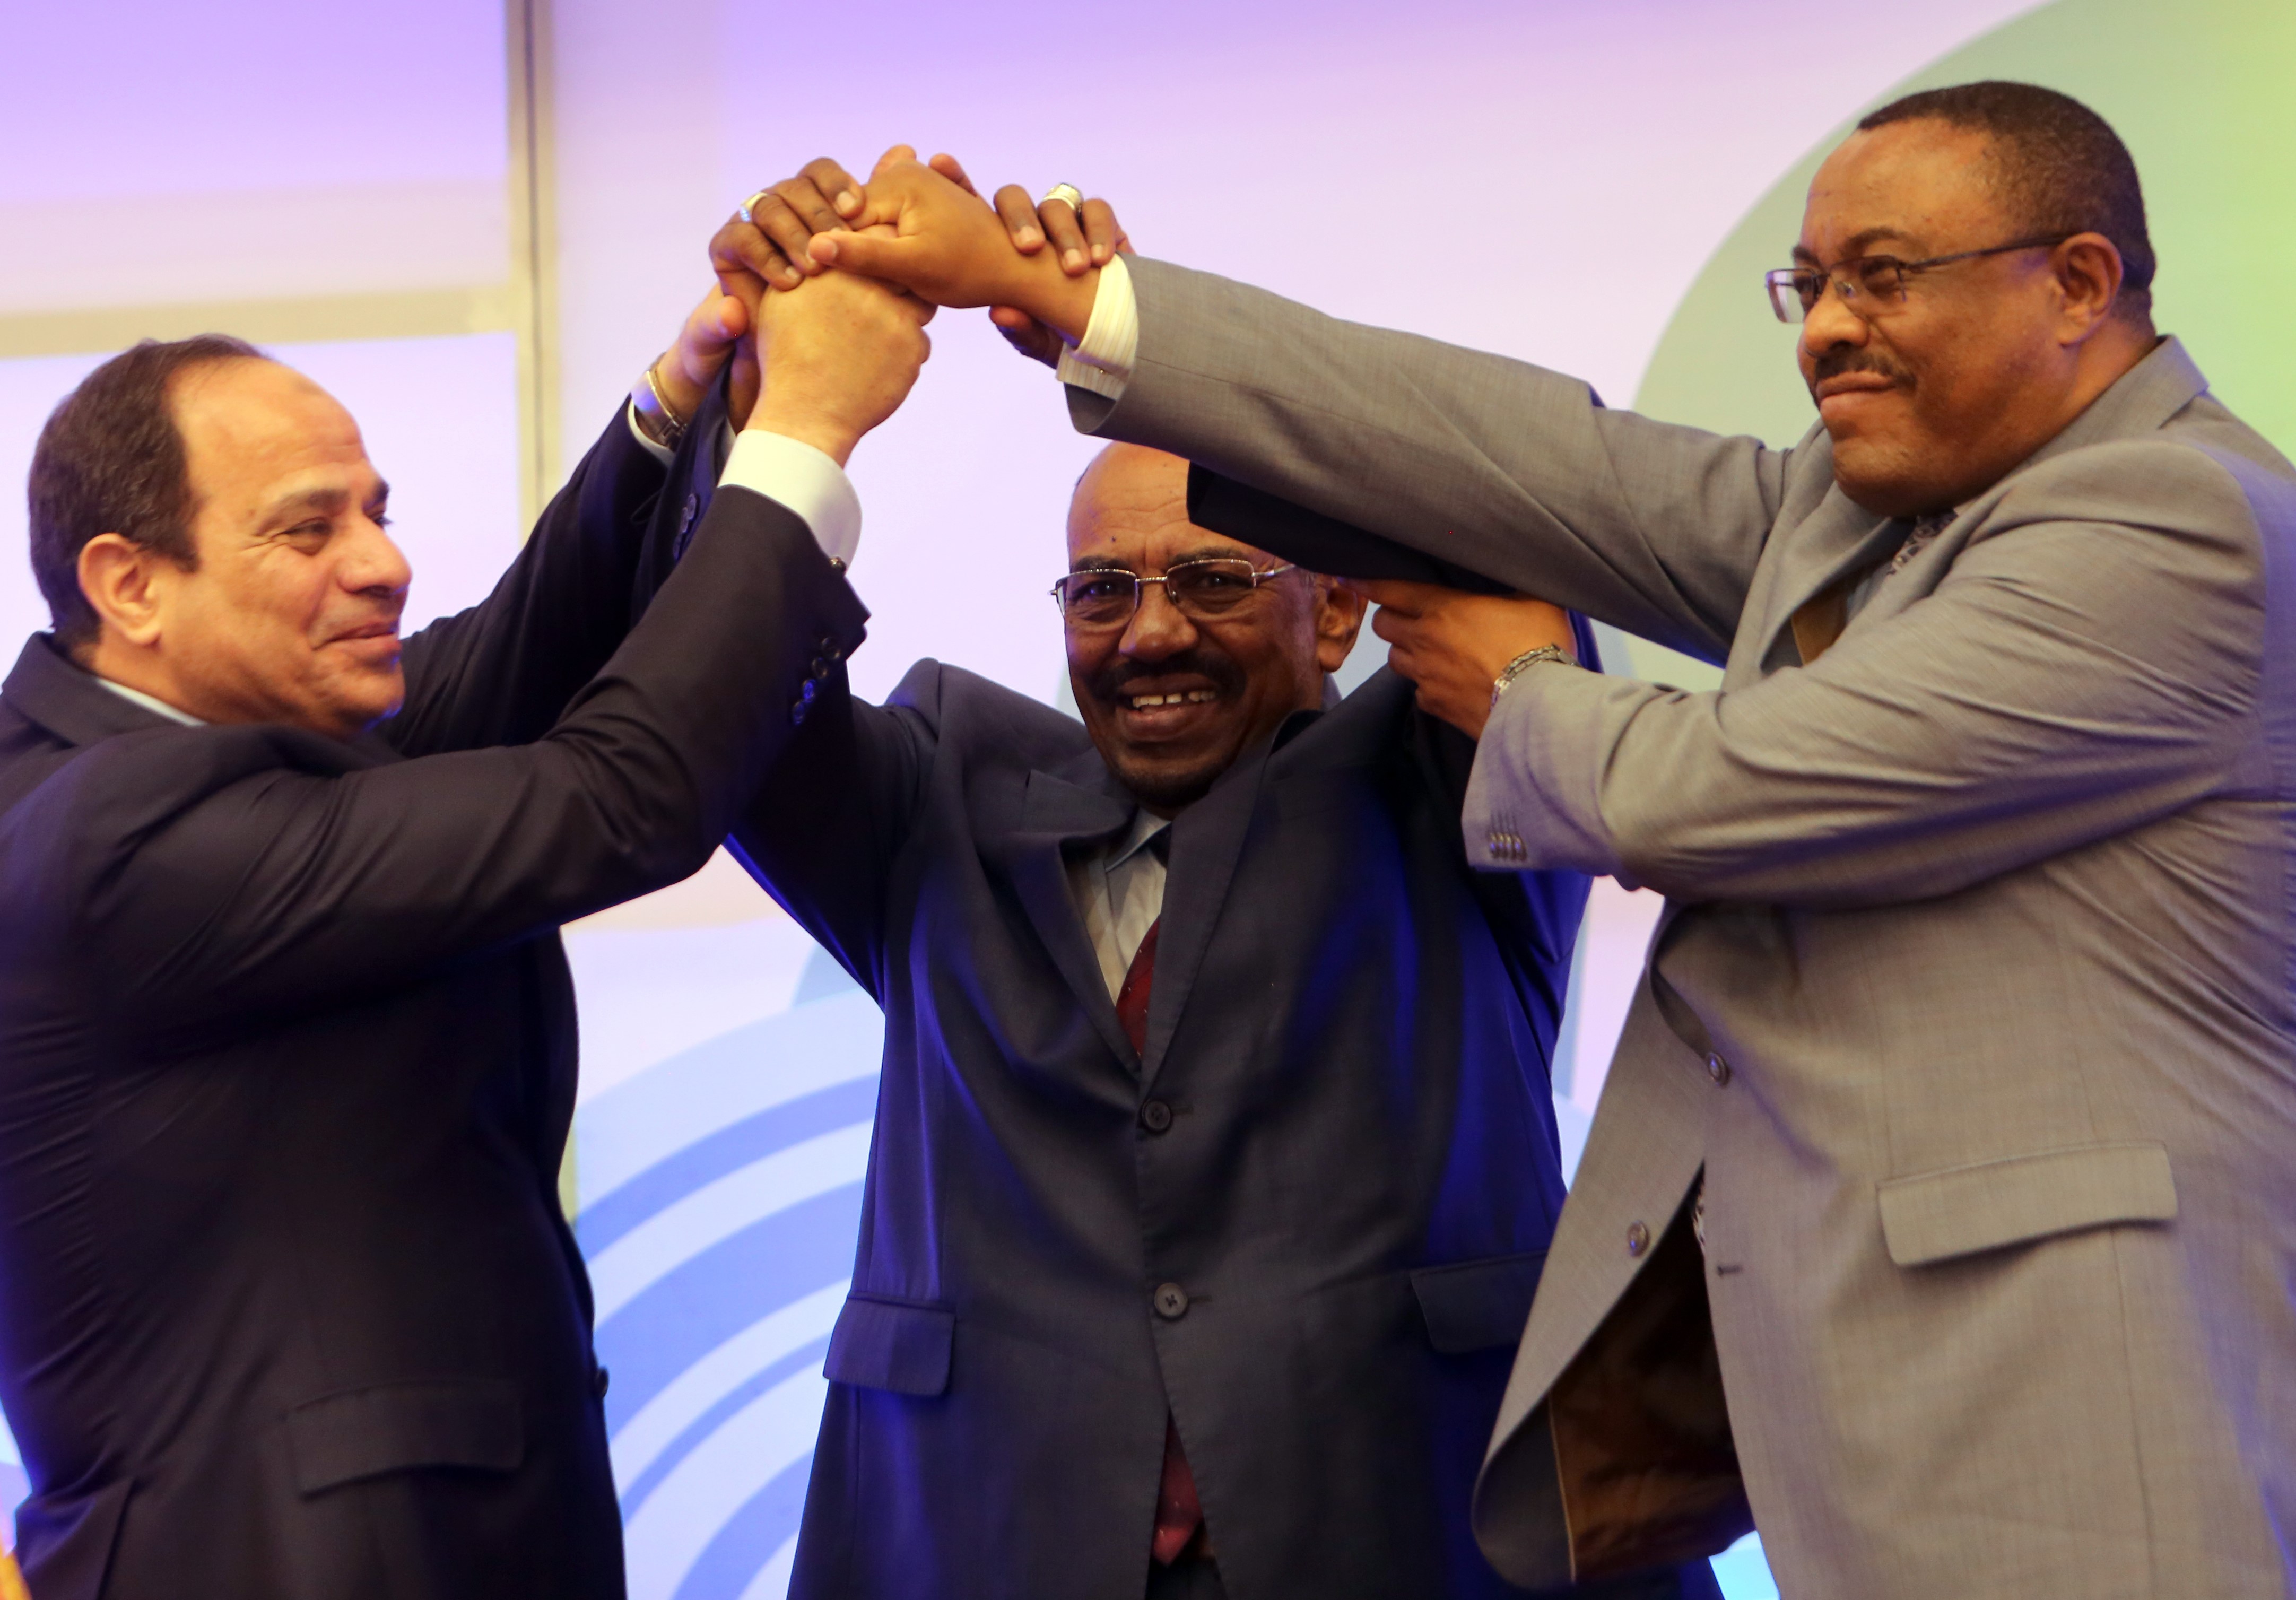 Egyptian President Abdel-Fattah al-Sisi (L), Sudanese President Omar al-Bashir (C) and Ethiopian Prime Minister Hailemariam Desalegn shake hands during a meeting in the Sudanese capital Khartoum on March 23, 2015, to sign the agreement of principles on Ethiopia's Grand Renaissance dam project